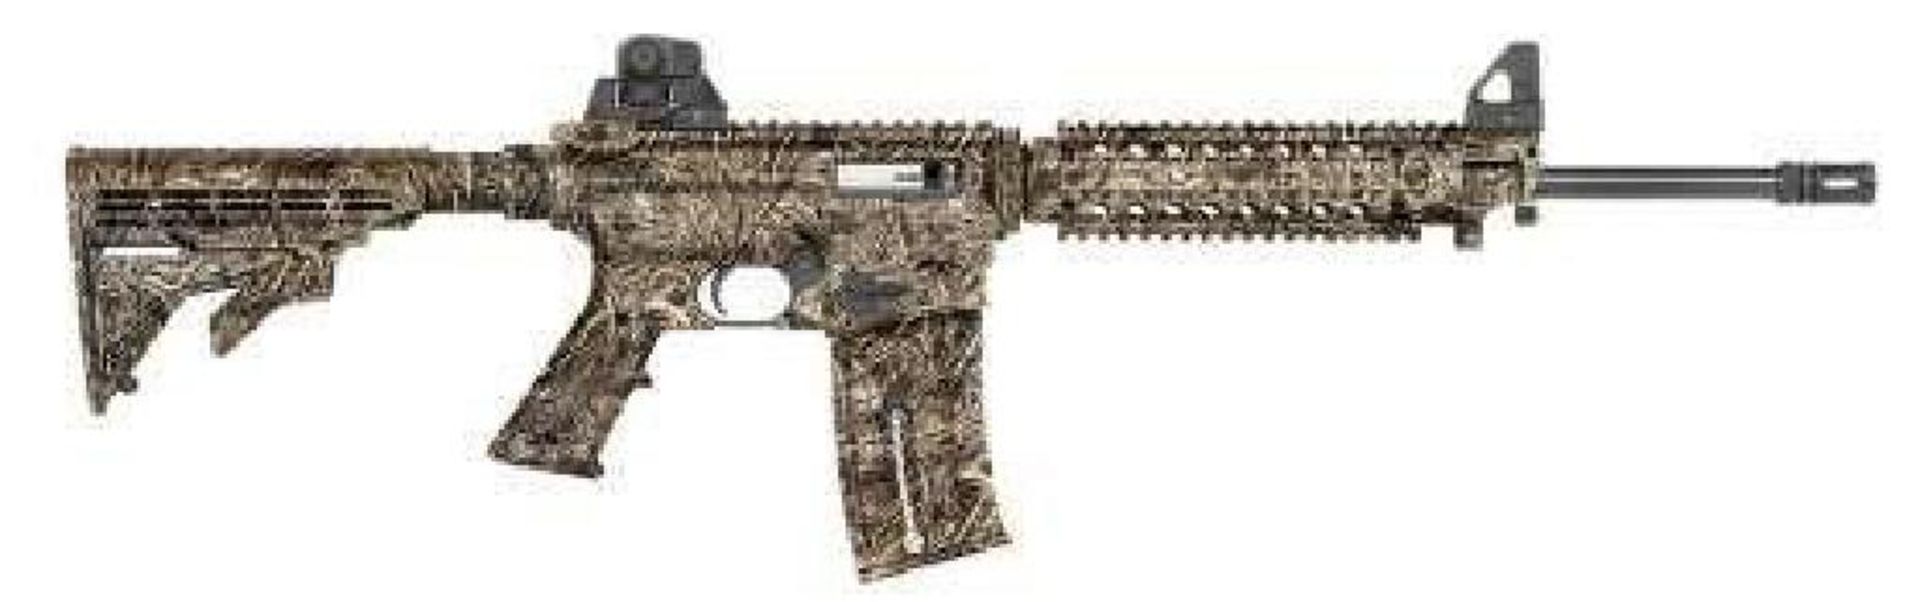 FAMILY:   MODEL:715T   TYPE:Rifle   ACTION:Semi-Auto   FINISH:Blue   STOCK/FRAME:Collapsible /